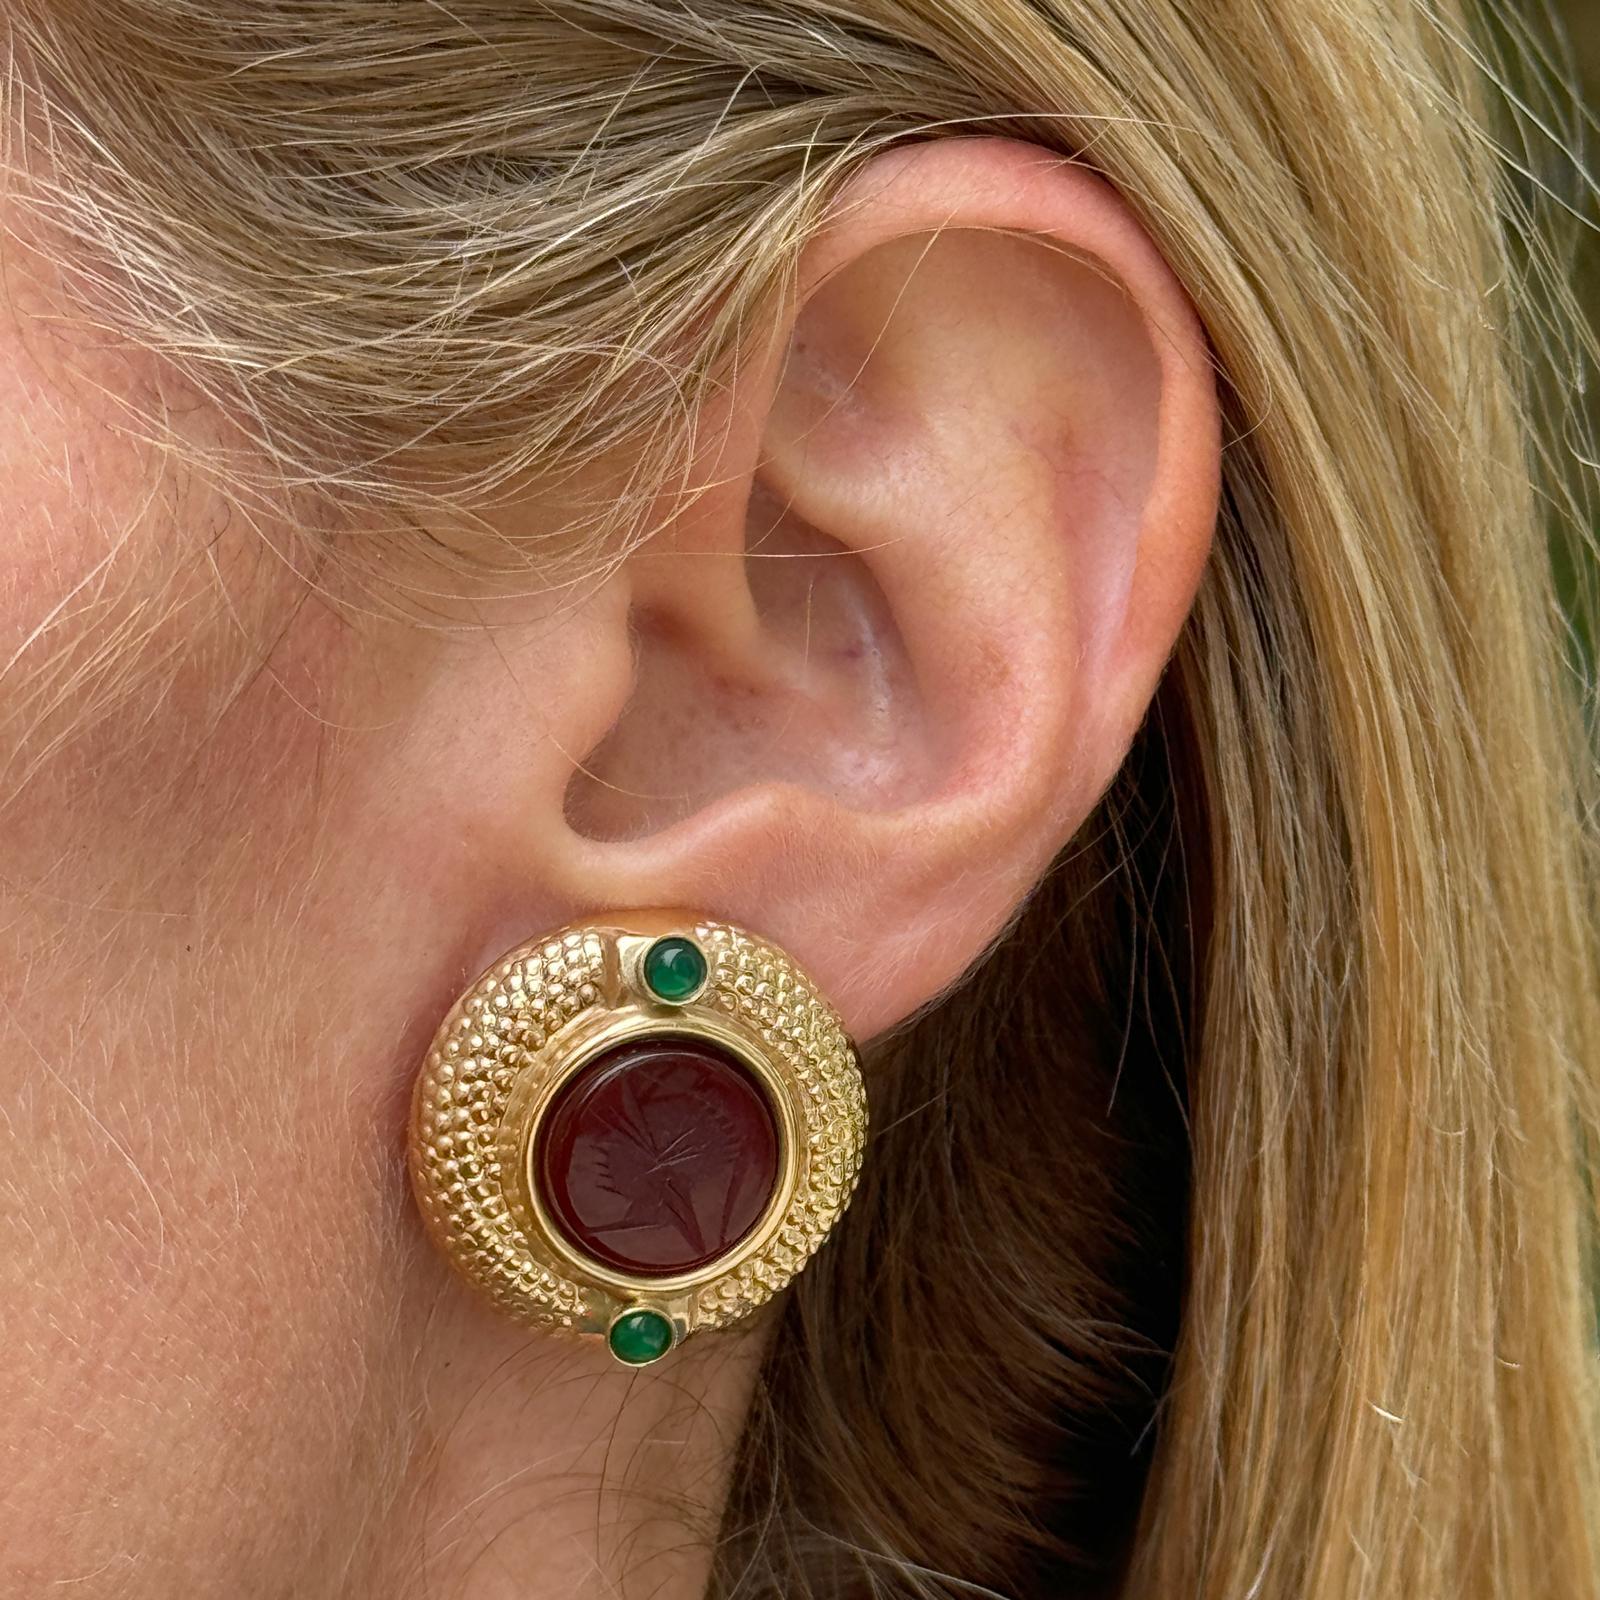 Beautiful carnelian intaglio & emerald earrings fashioned in textured 14 karat yellow gold. The round earrings feature intaglio carved carnelian gemstone flanked by emerald accents. The earrings measure 25 x 25mm and have lever-back posts. Weight: